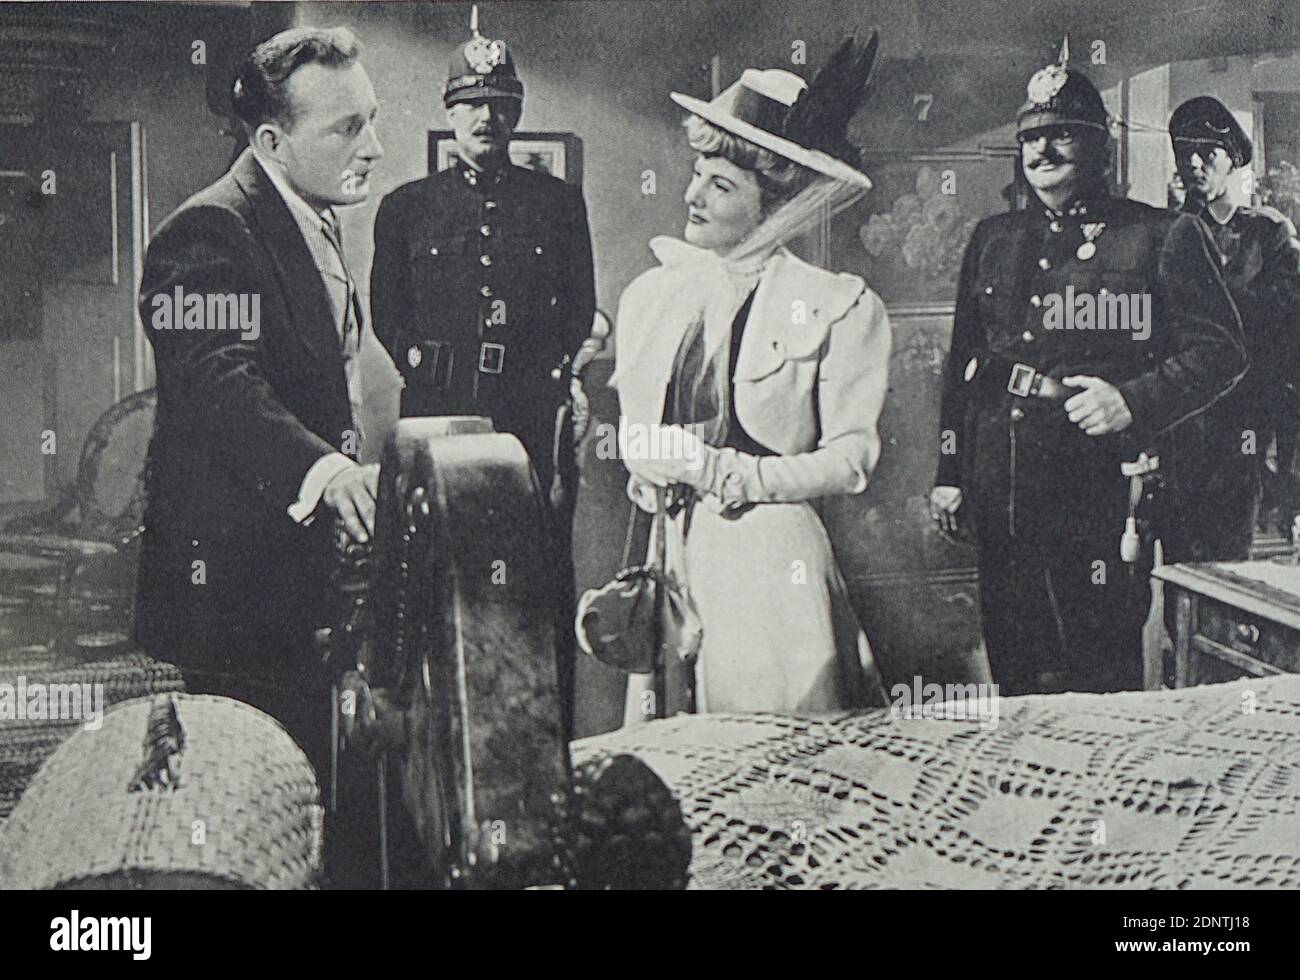 Film still from 'The Emperor Waltz' starring Bing Crosby, Joan Fontaine, Richard Haydn, and Lucile Watson. Stock Photo